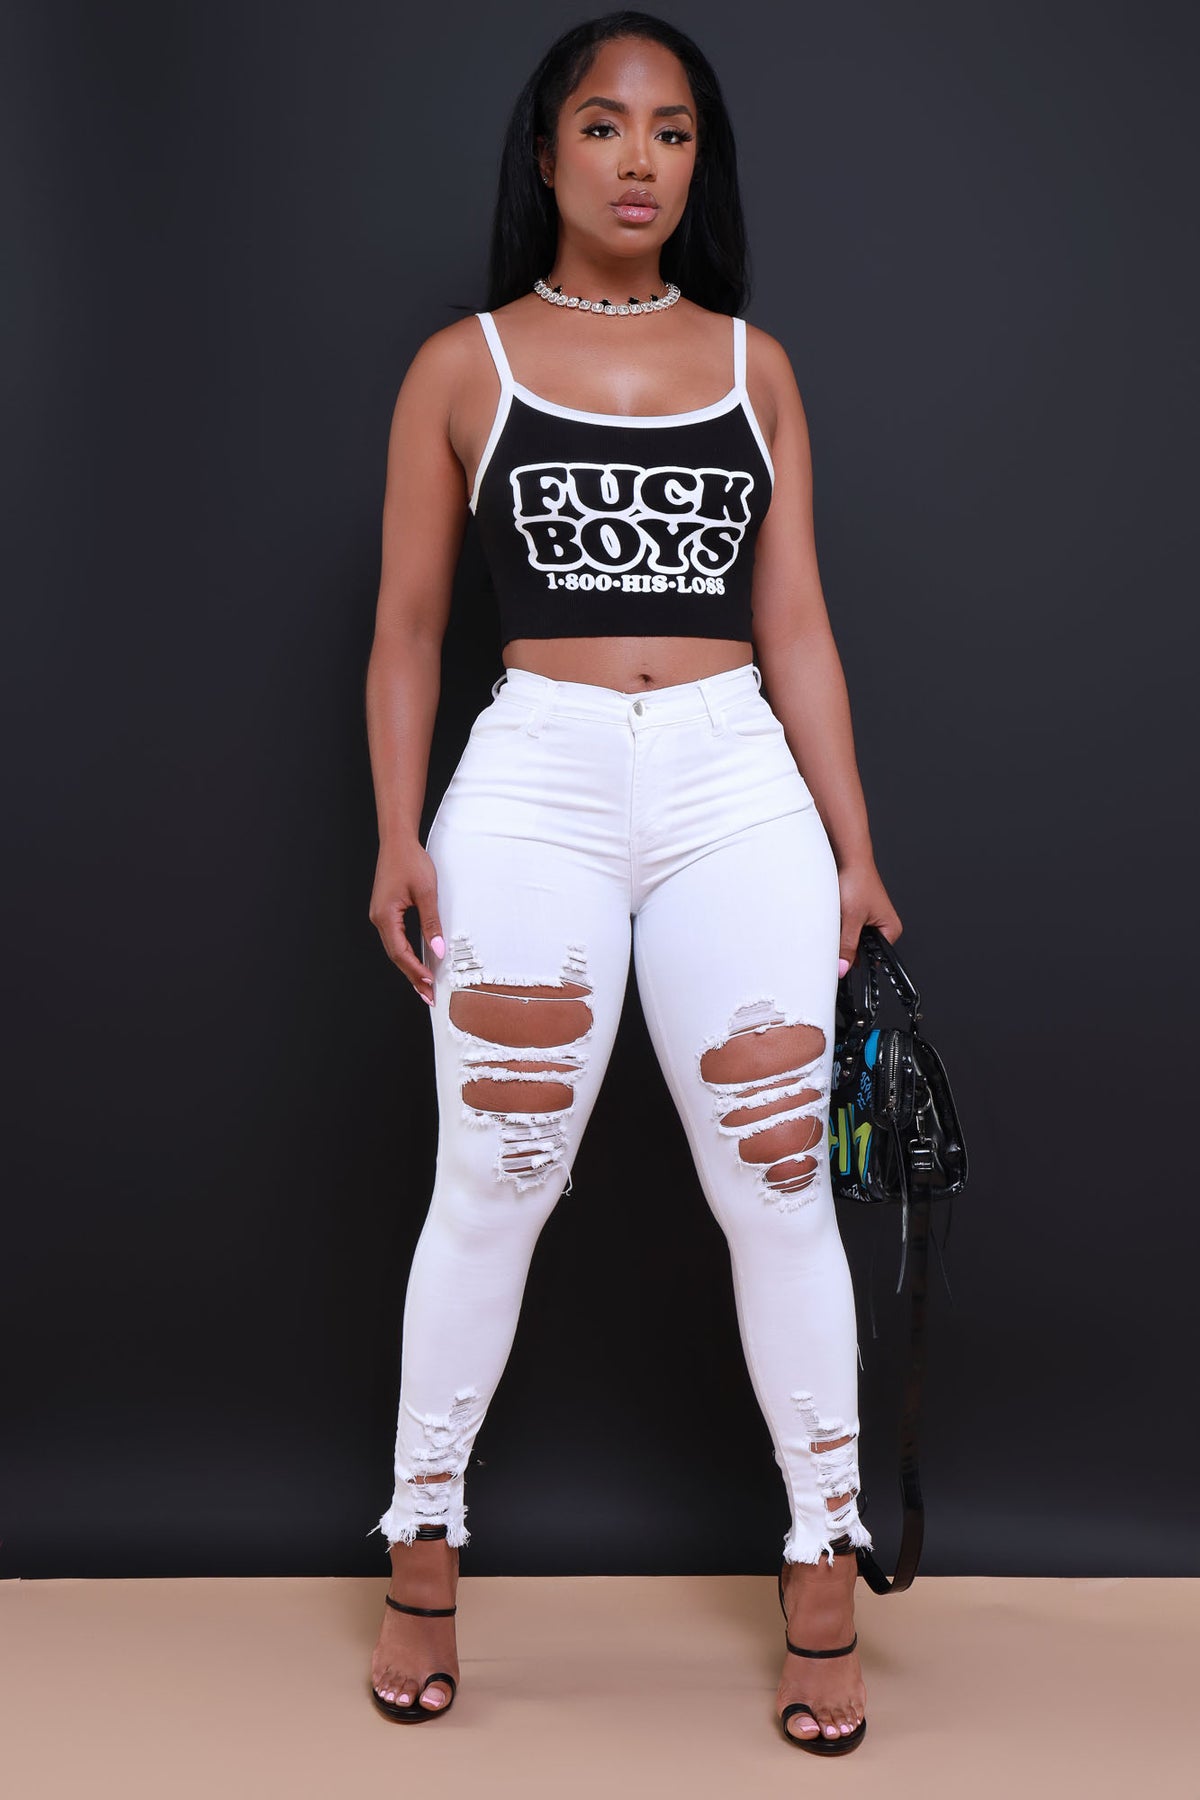 
              1-800-His-Loss Graphic Crop Top - Black/White - Swank A Posh
            